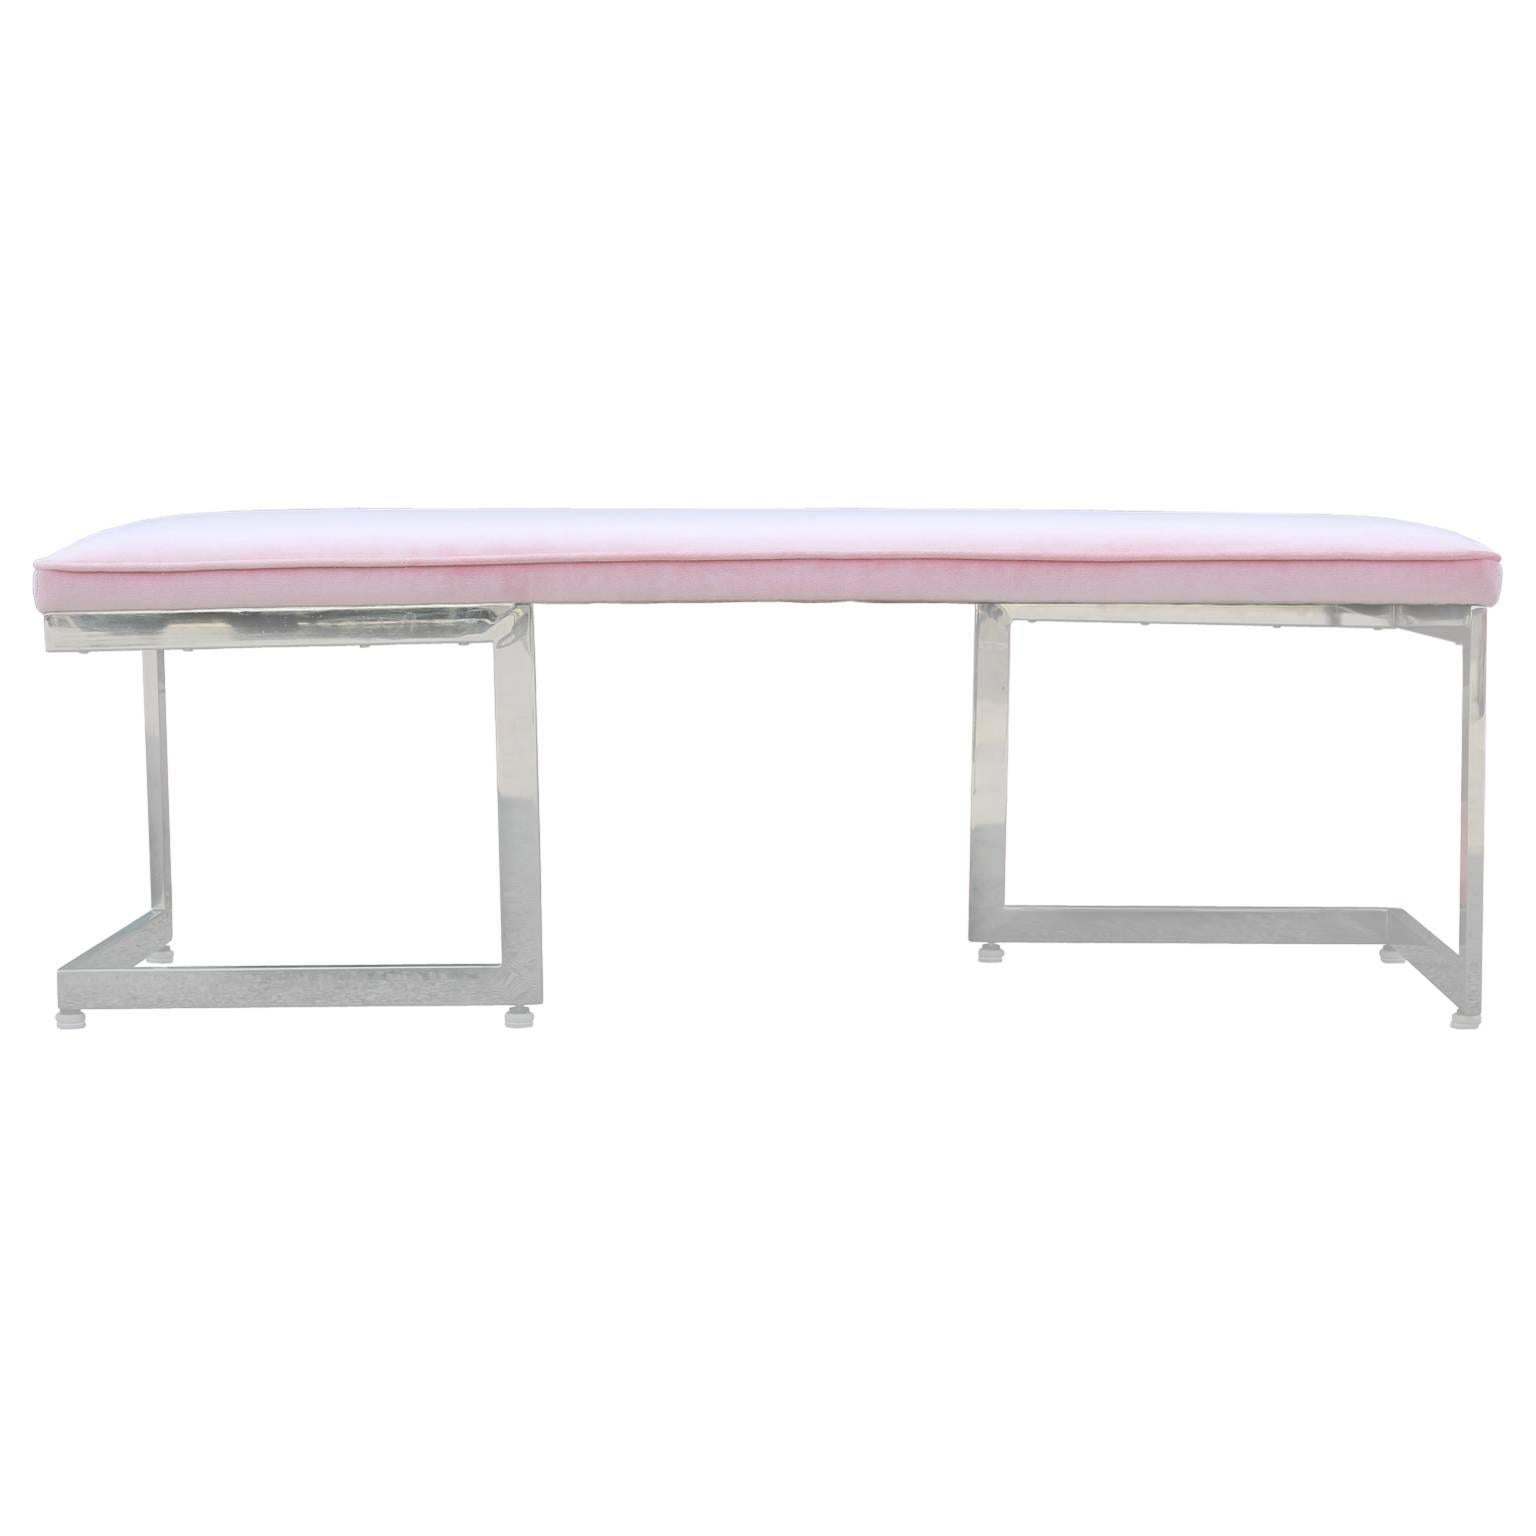 Gorgeous Milo Baughman style asymmetrical chrome bench reupholstered in a light pink velvet. Perfect piece to brighten up the room as the chrome reflects light.